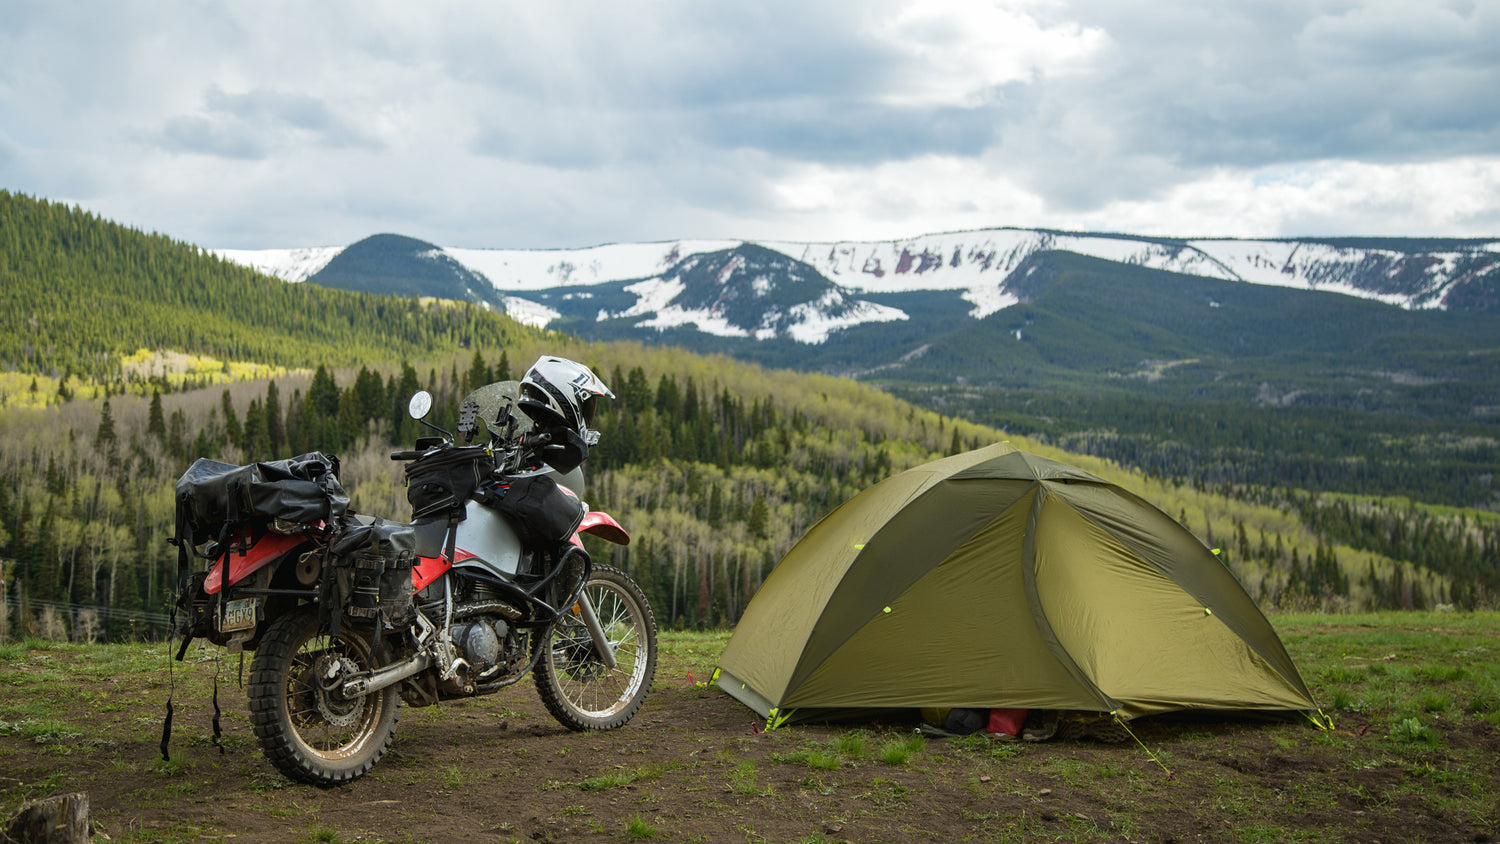 motorcycle camping near tent